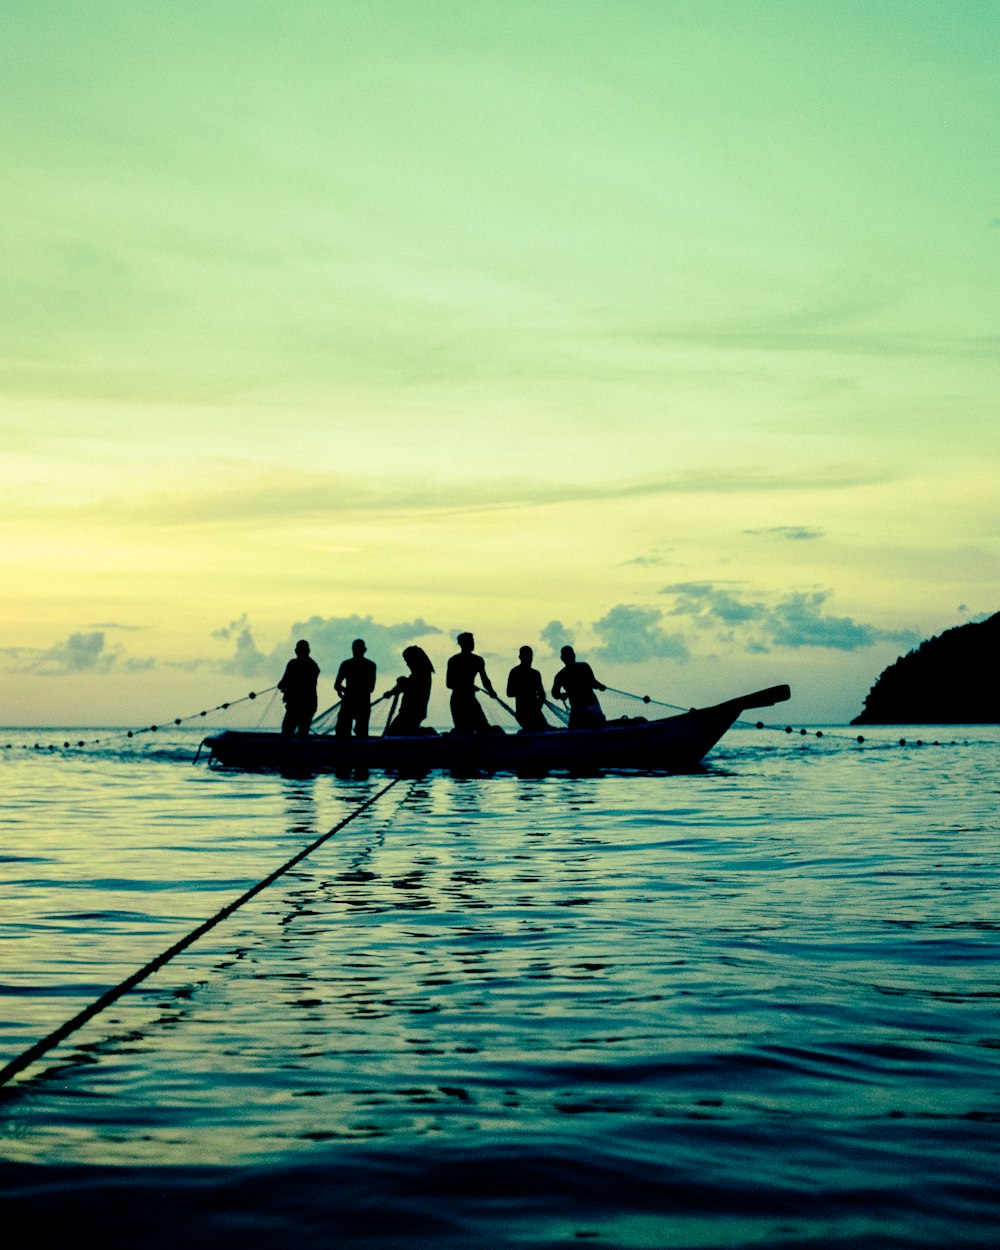 a group of people riding on top of a boat in the ocean